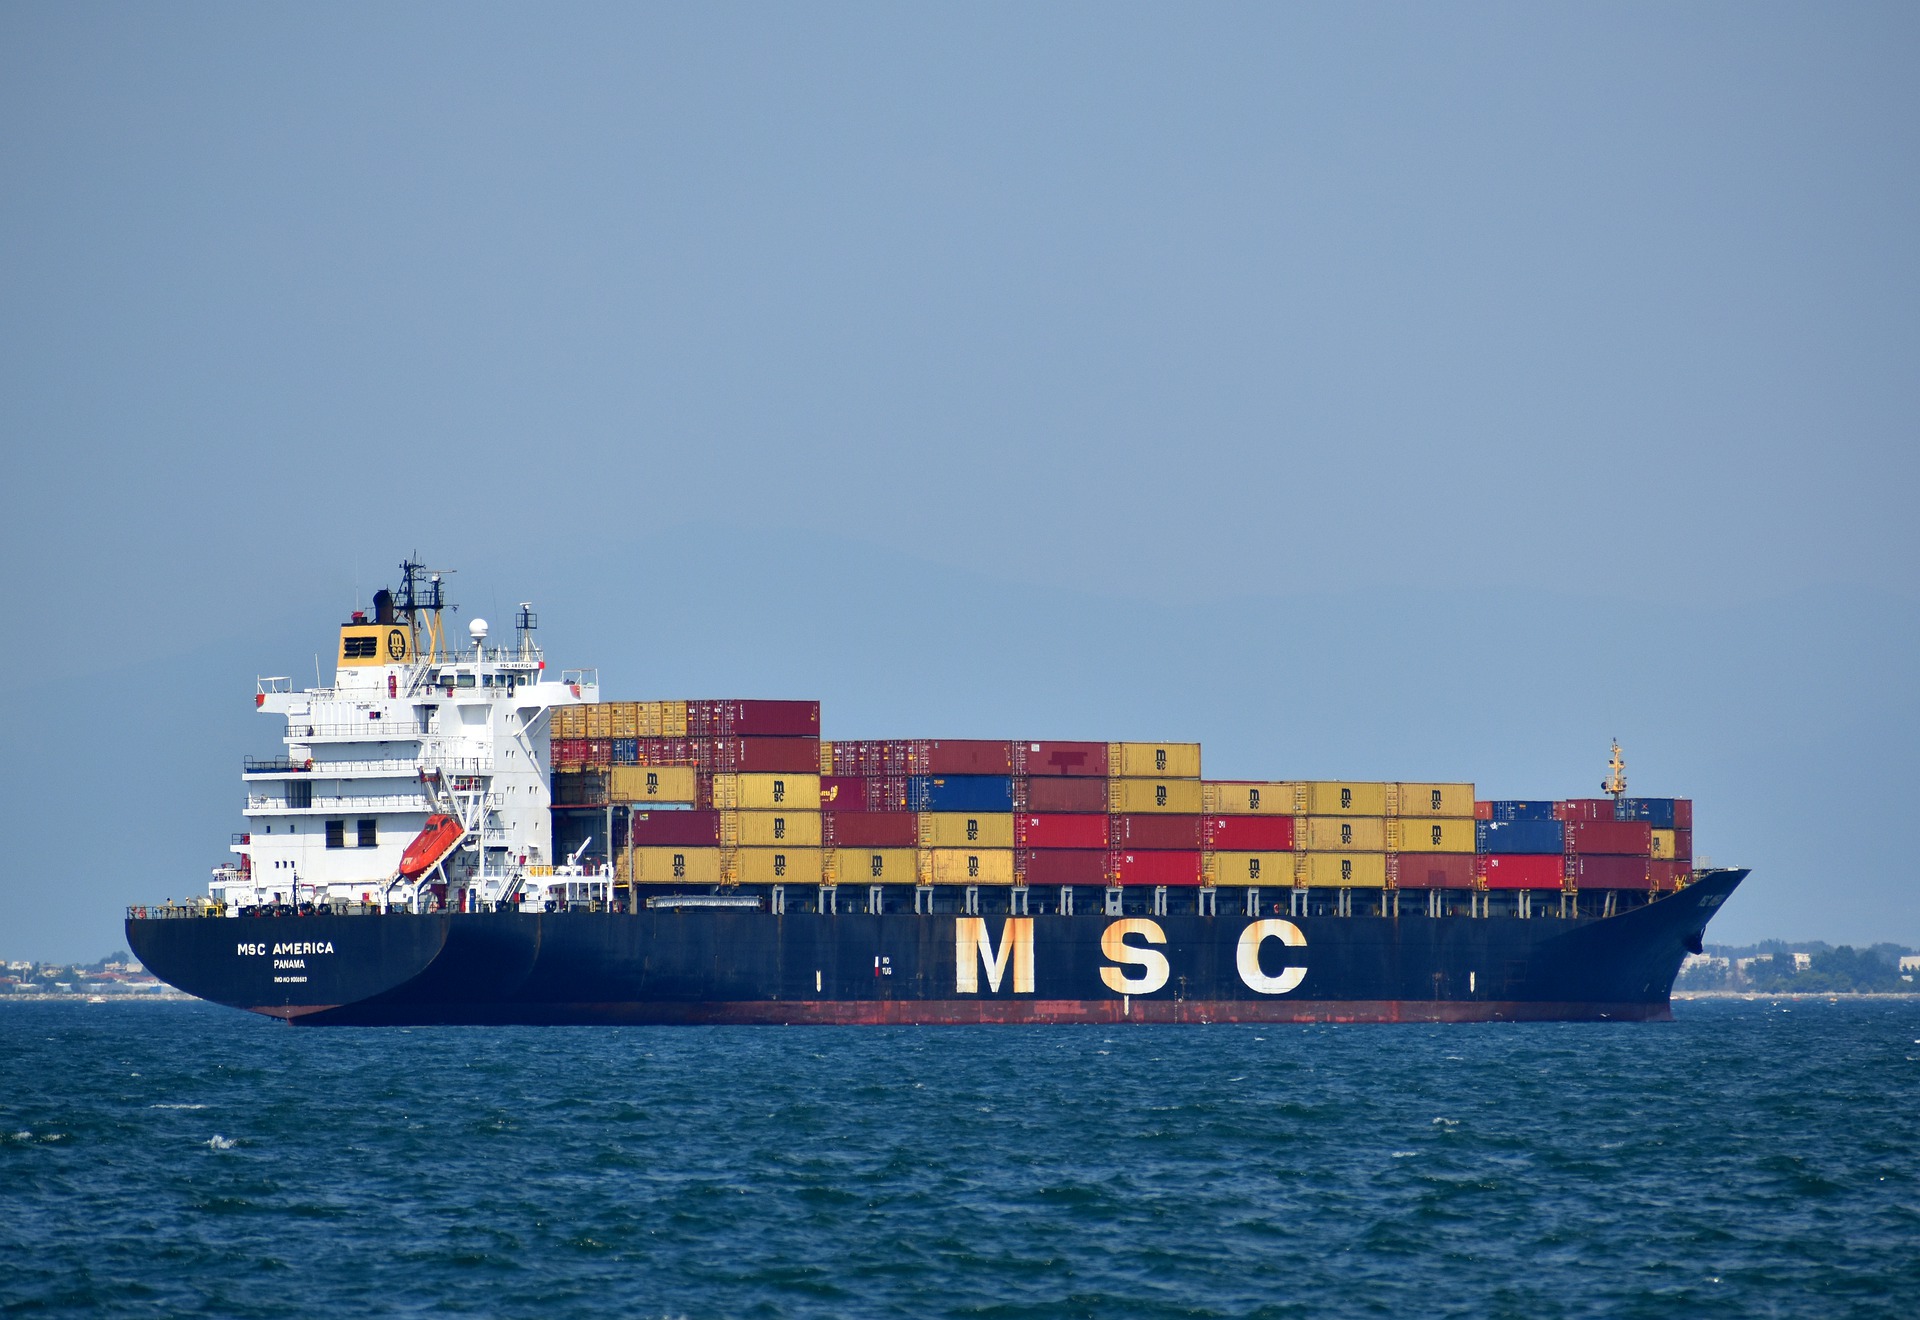 90 % of world trade is conducted by sea. But container ships like this one are usually fueled with toxic bunker fuel. 